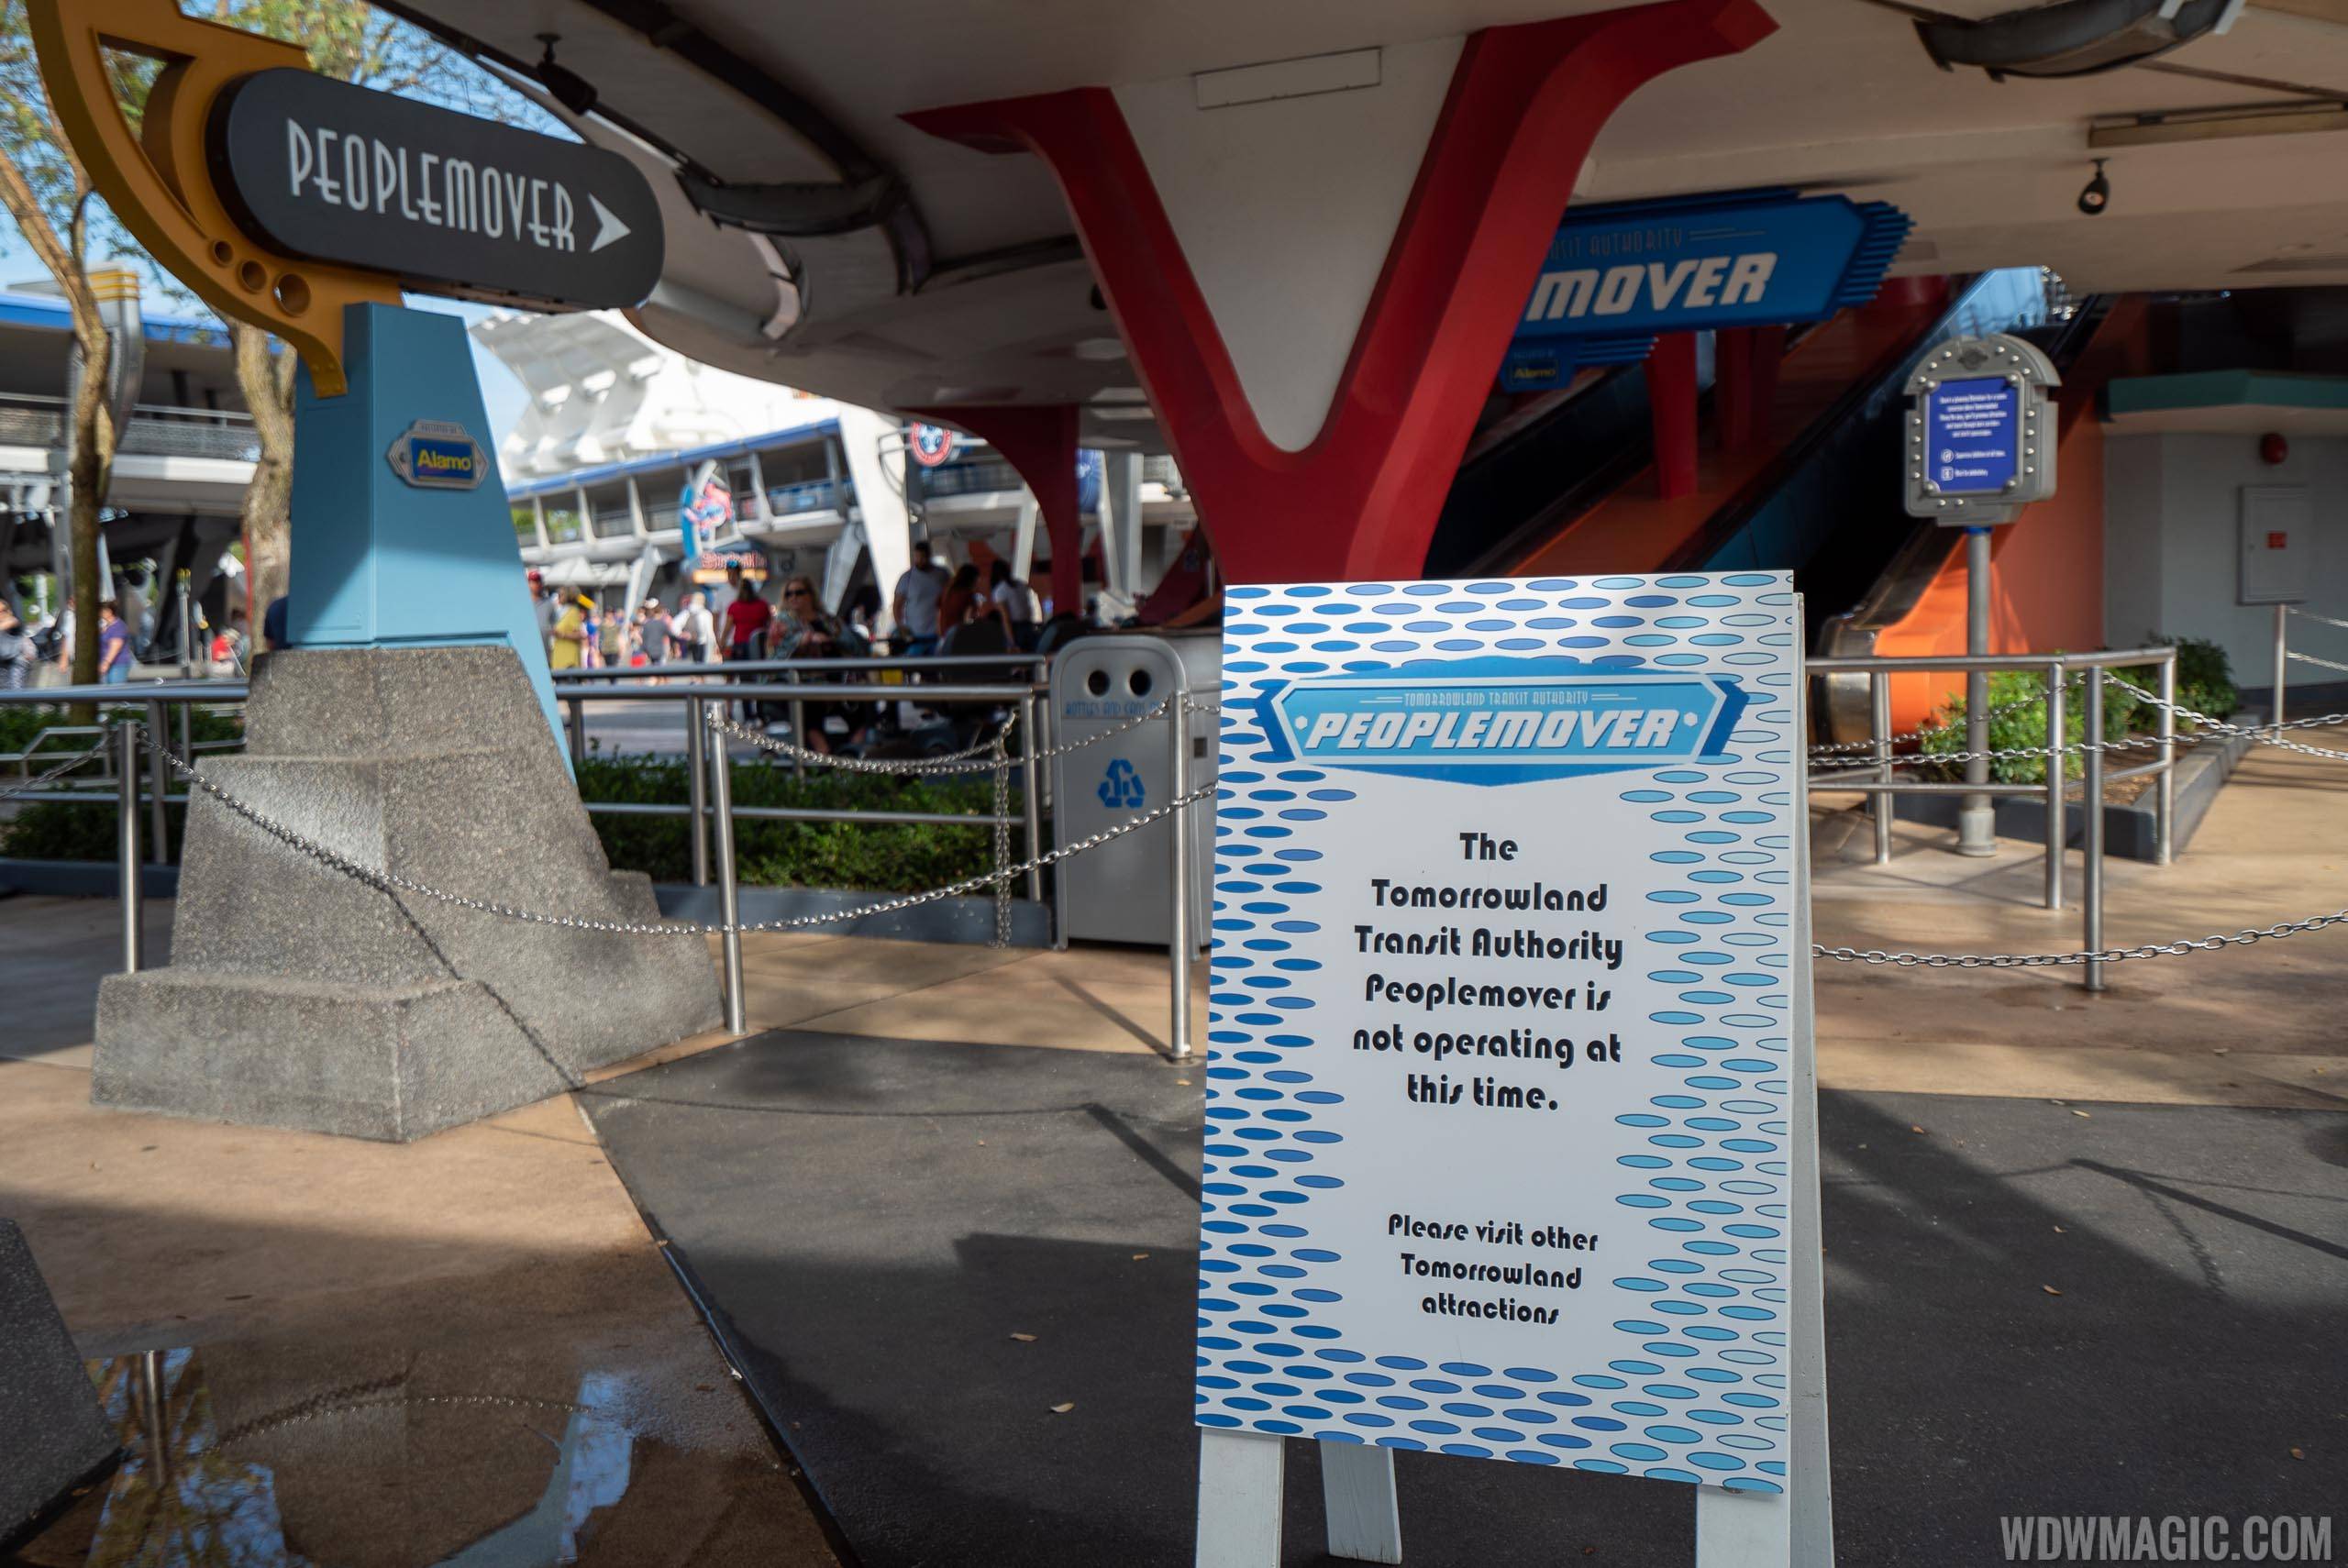 PHOTOS - Tomorrowland Transit Authority PeopleMover closure continues at the Magic Kingdom